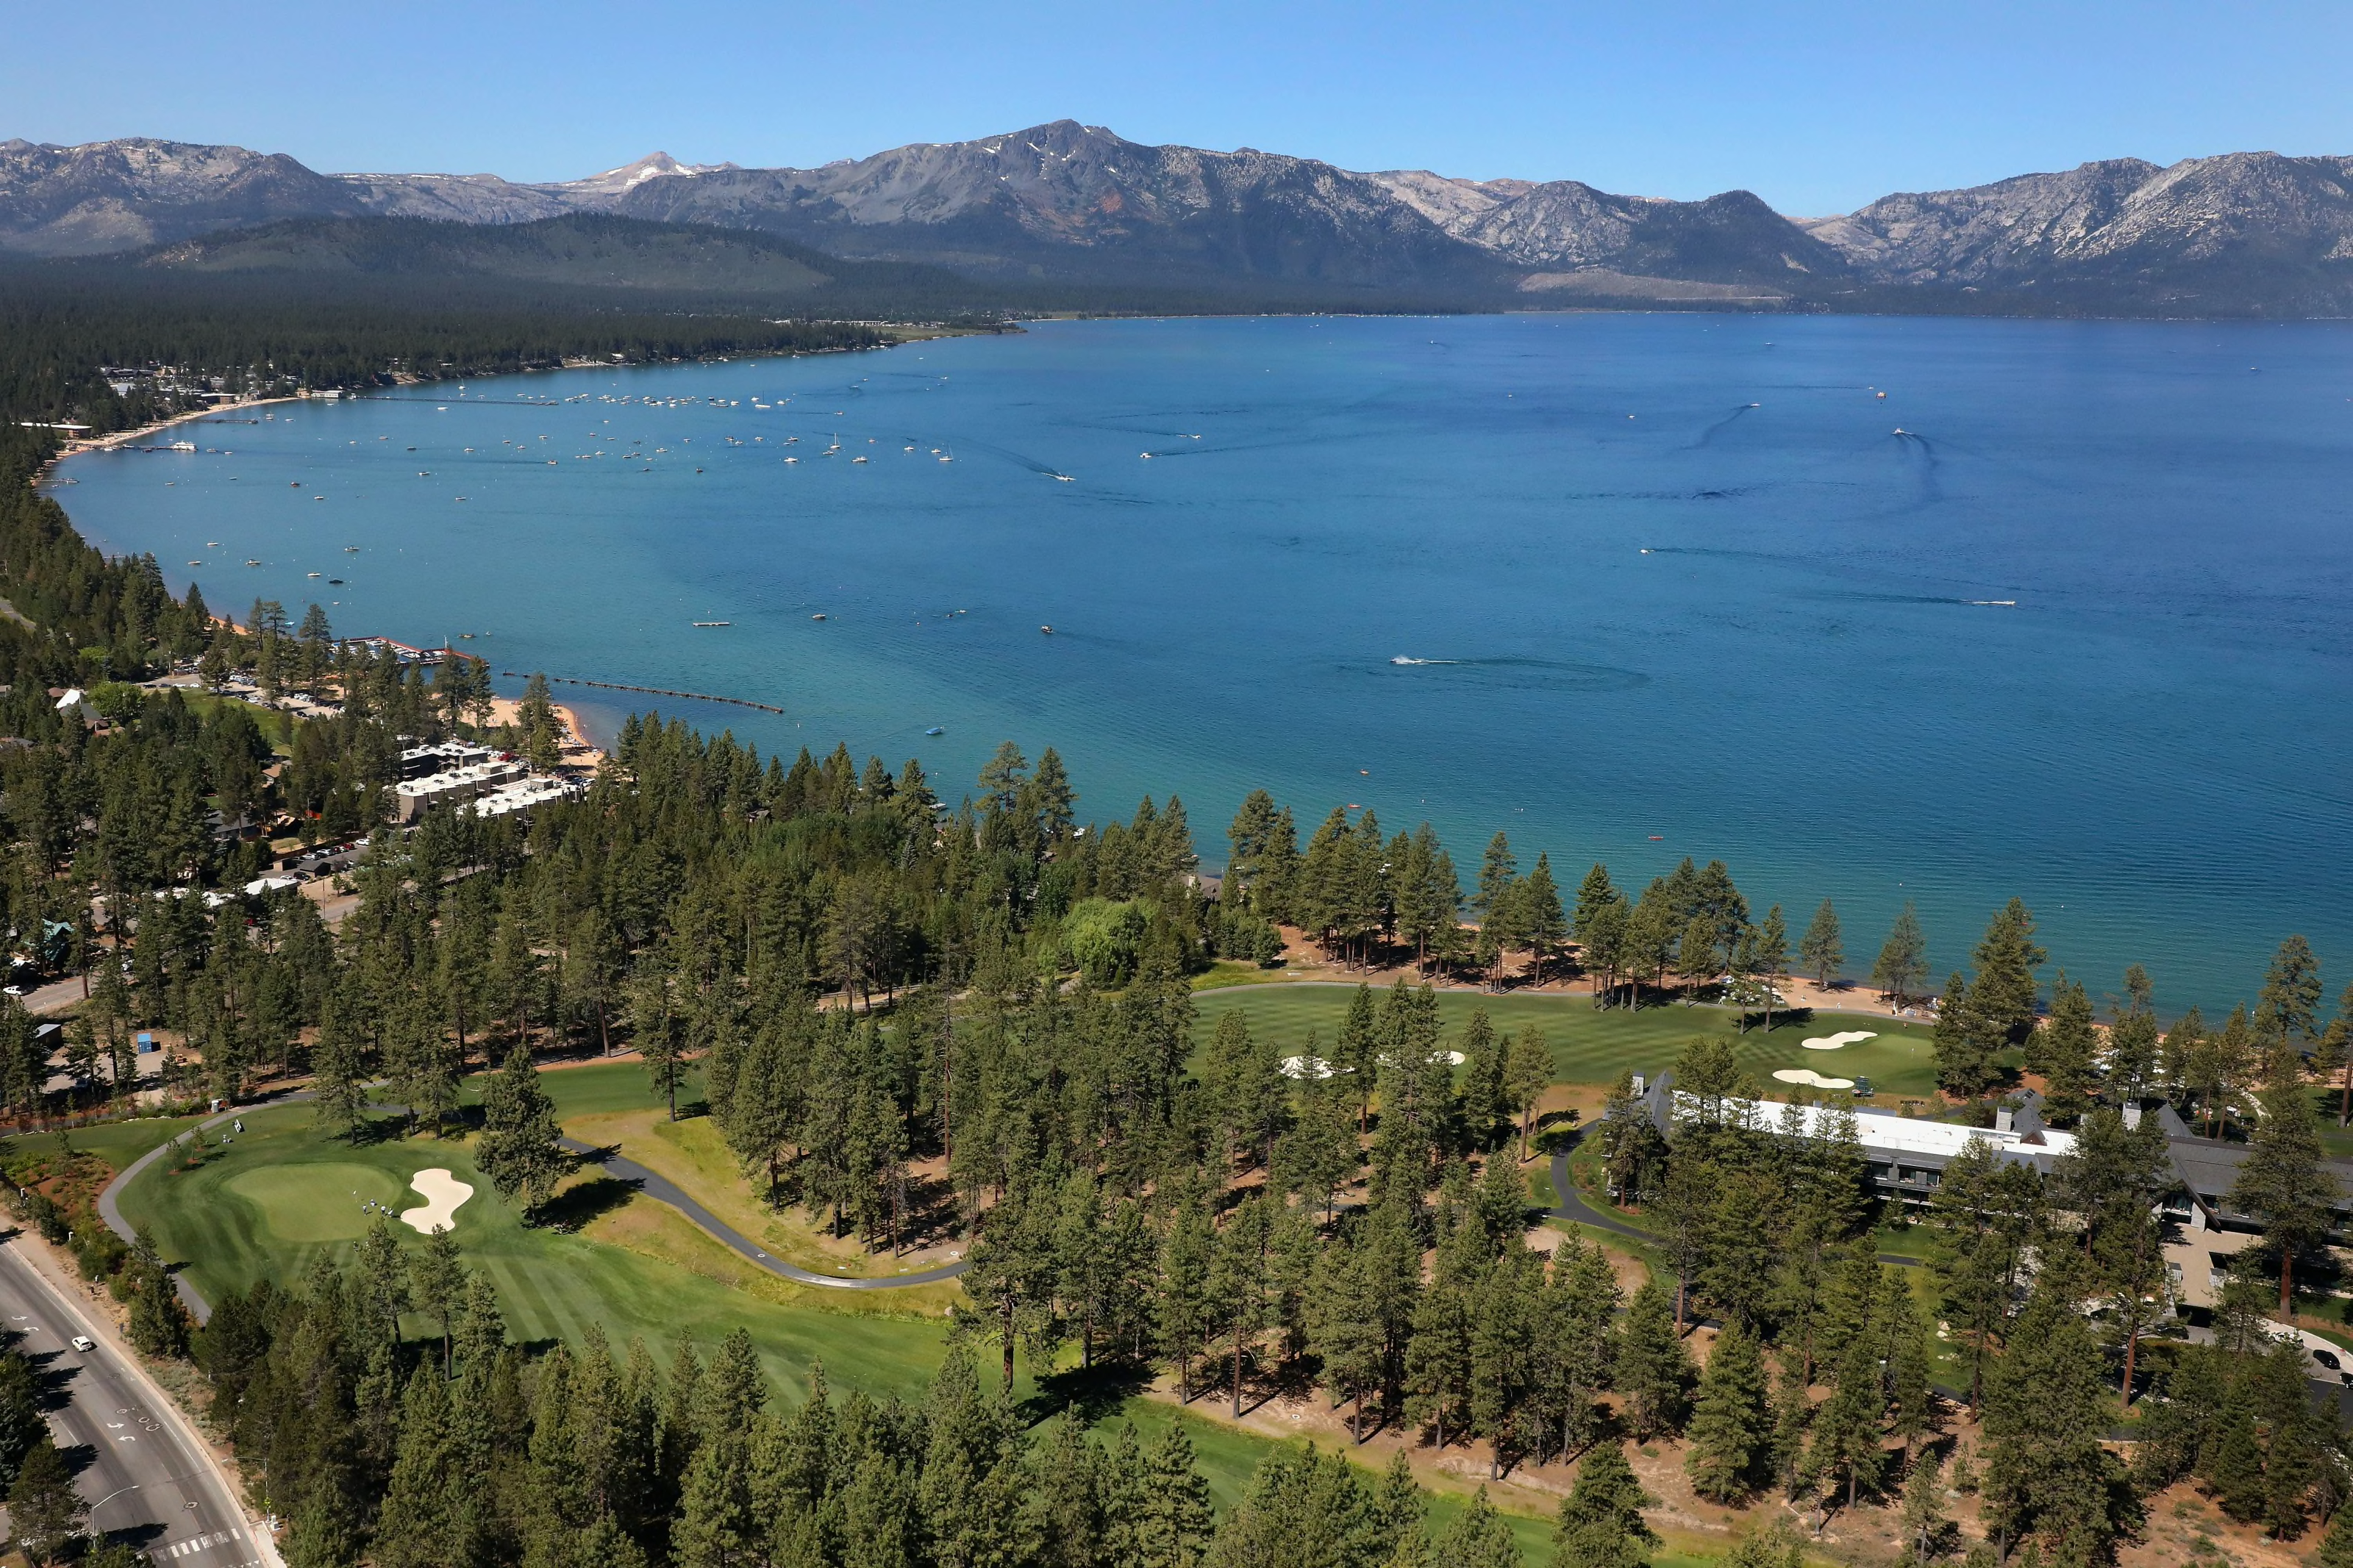 NHL play it pitch perfect with matchup selections for Lake Tahoe event